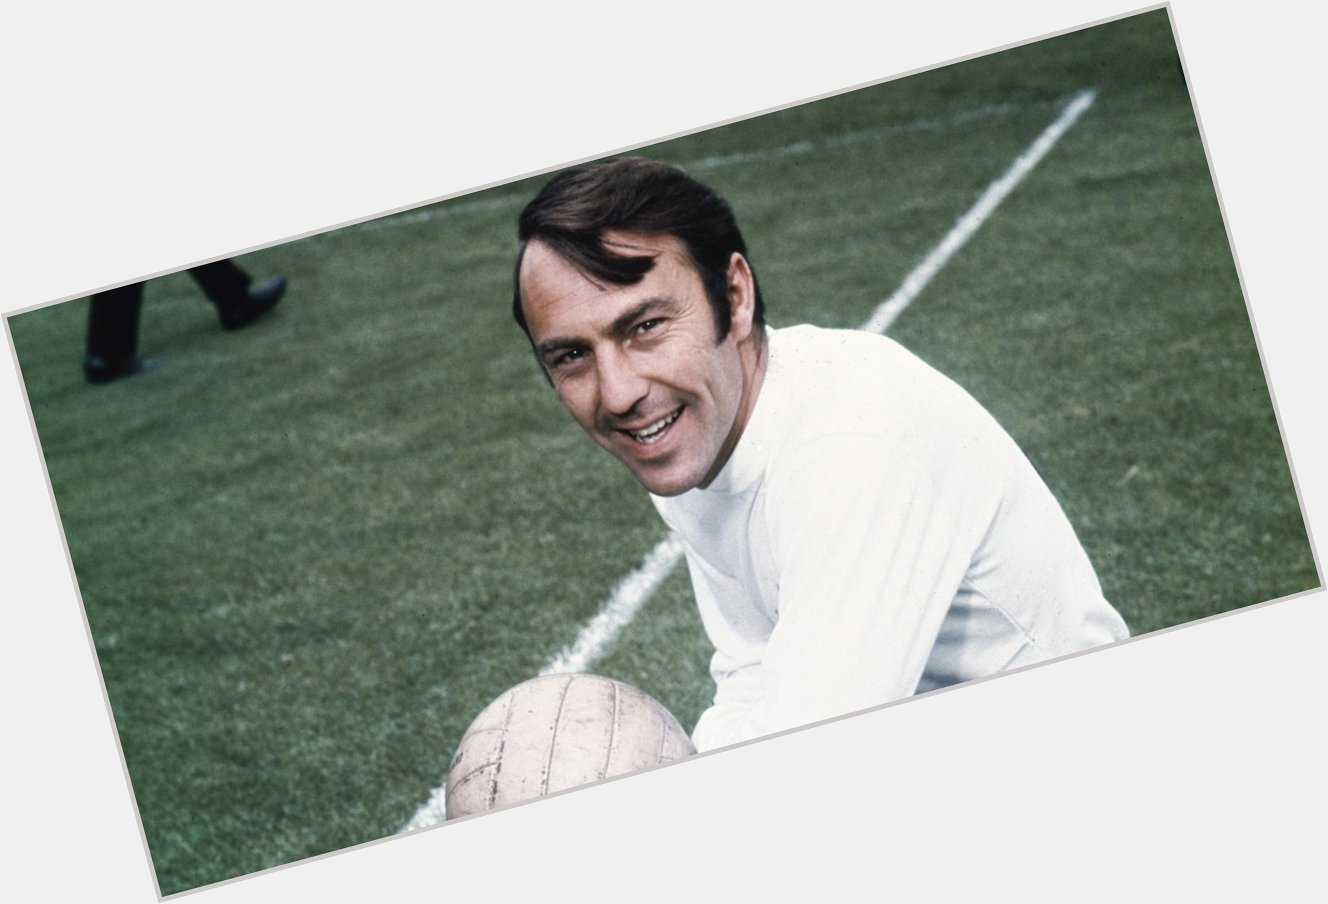 A very Happy Birthday to Jimmy Greaves! 